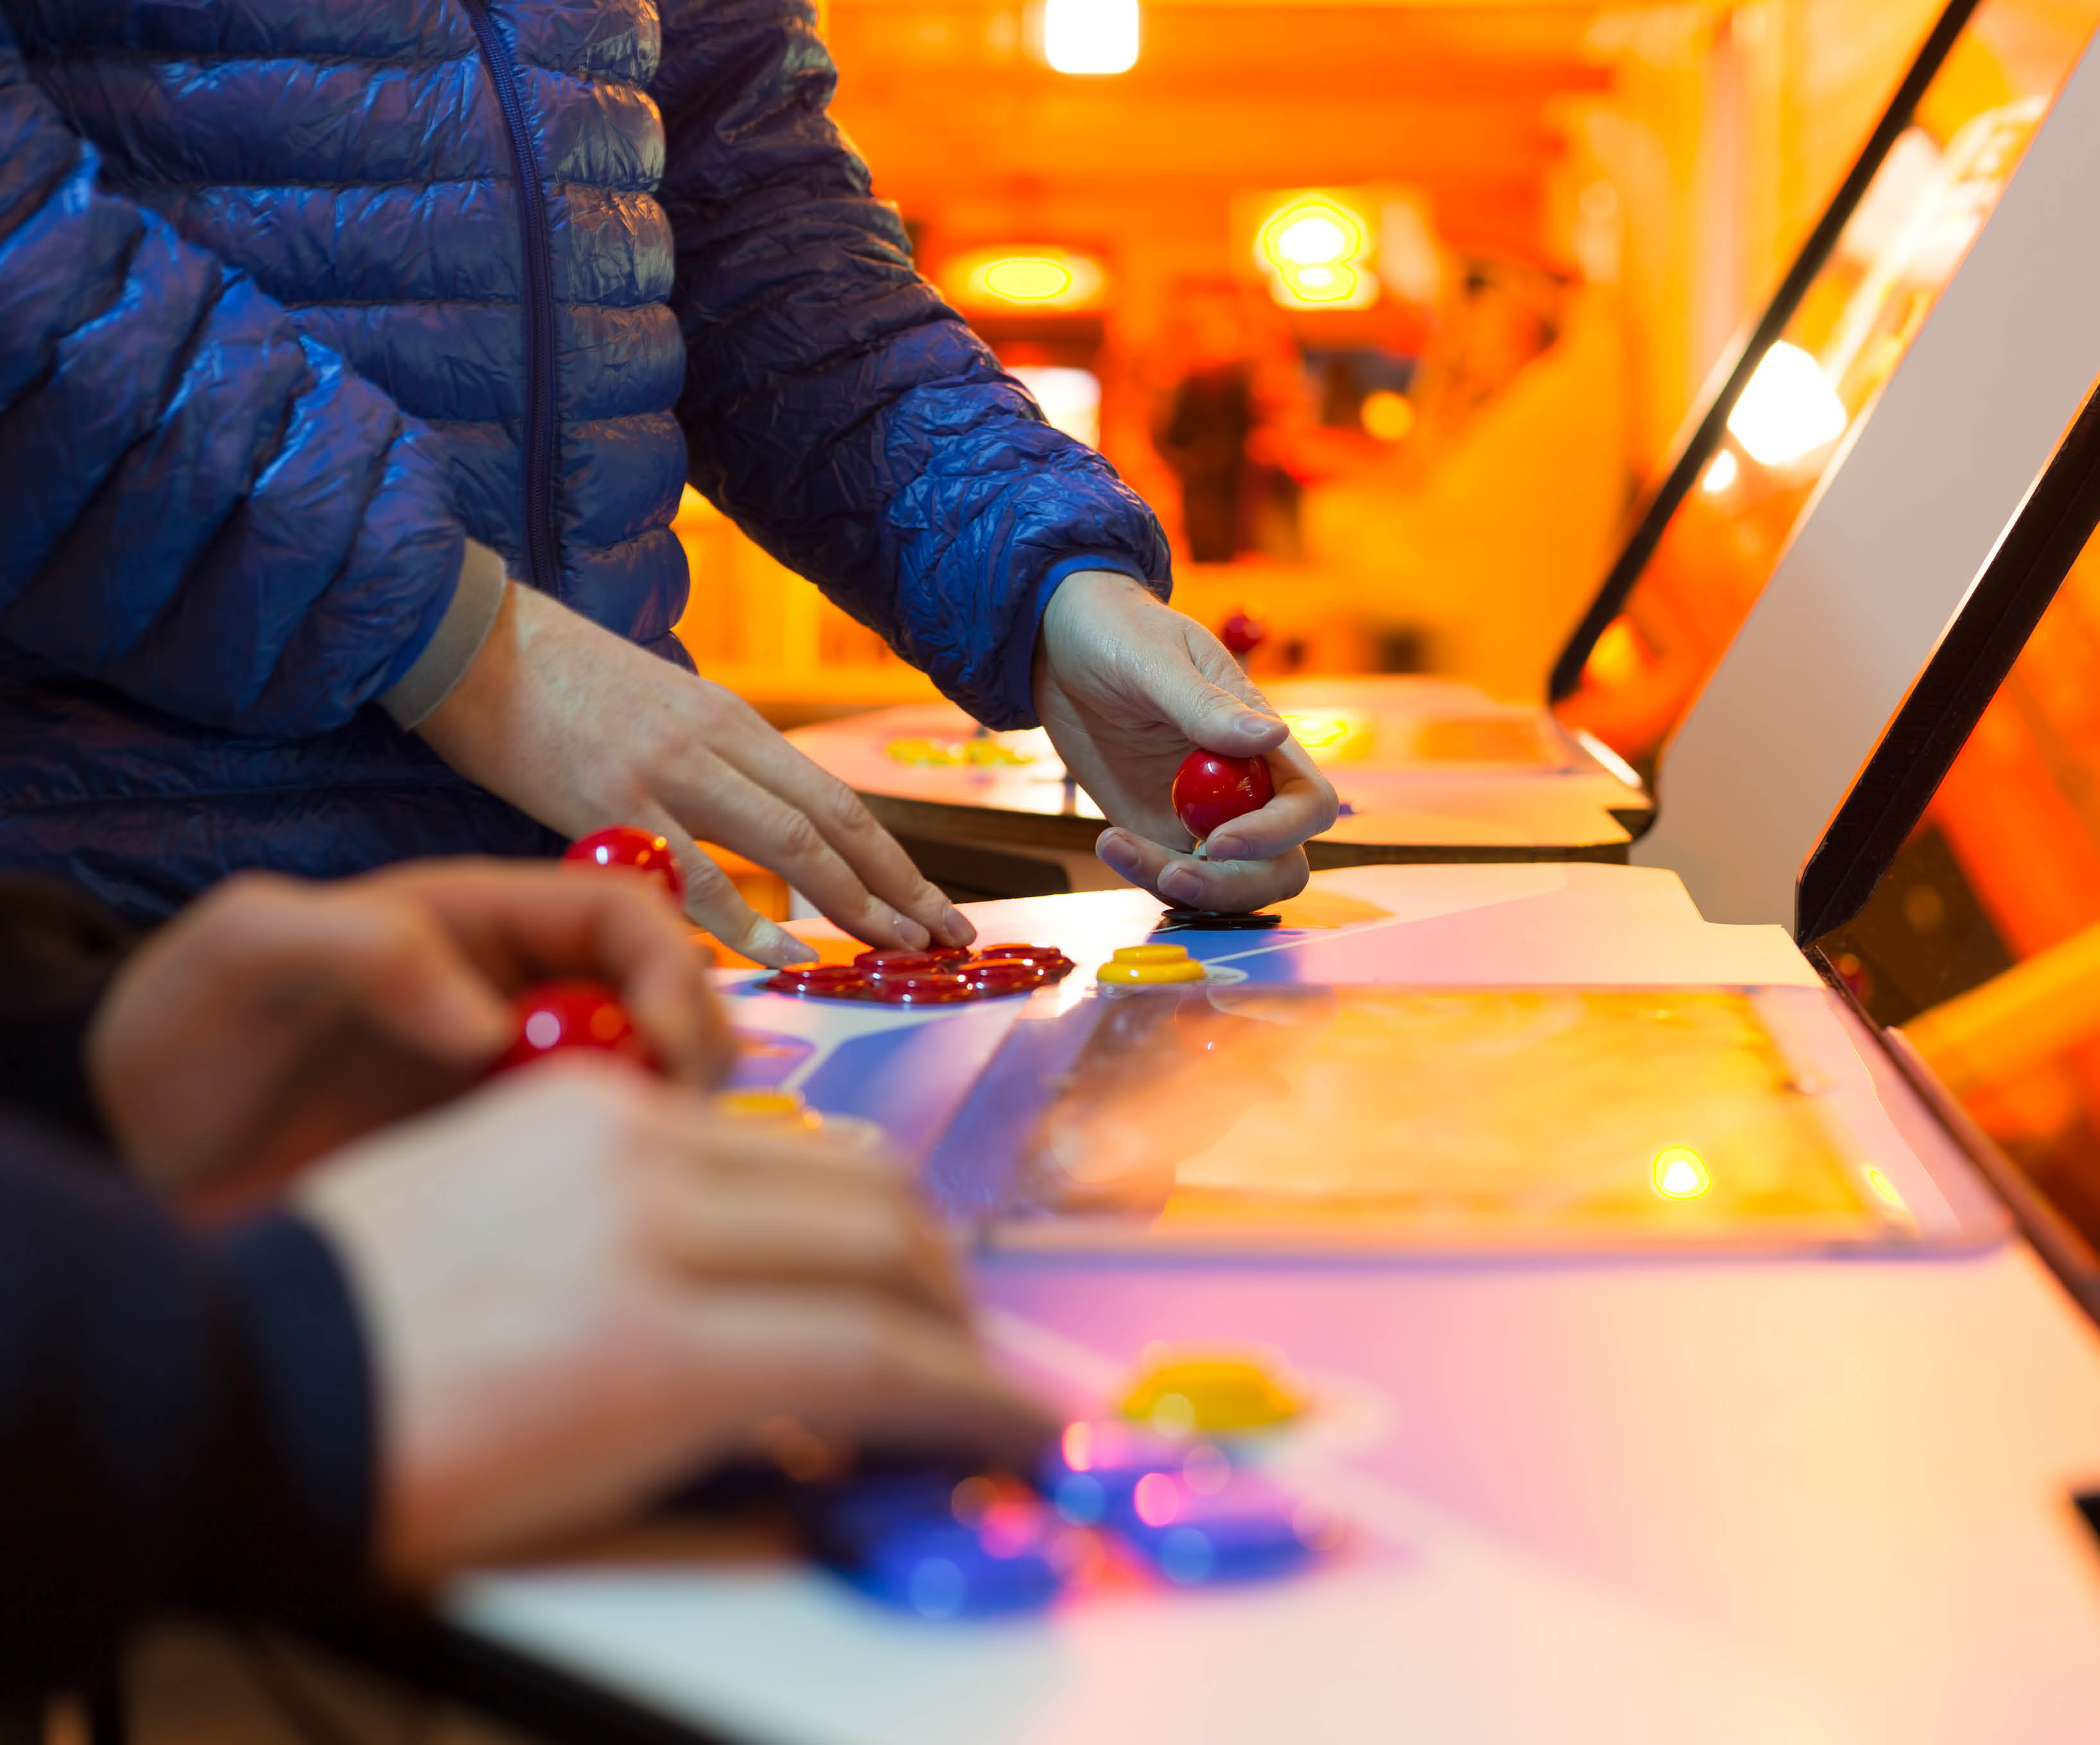 Looking for something to do these school holidays? Drop into Sutherland Library to step back in time to the ‘80s with retro arcade game machines.